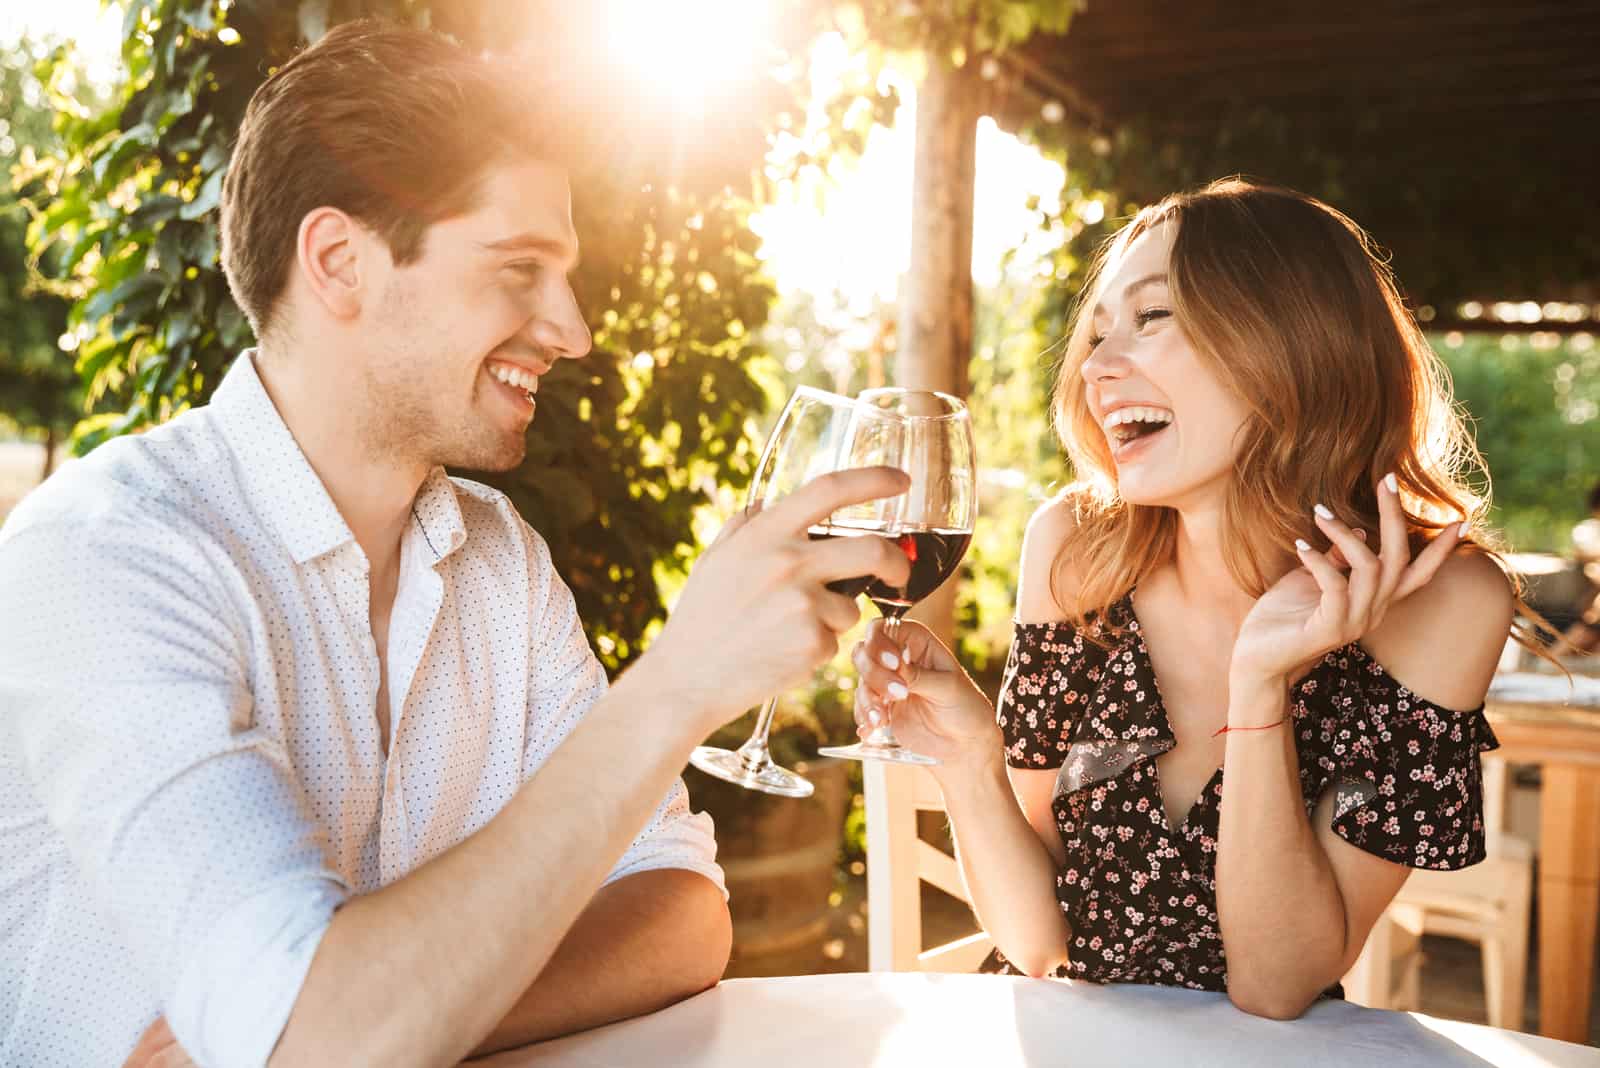 a smiling man and woman talk and toast with wine